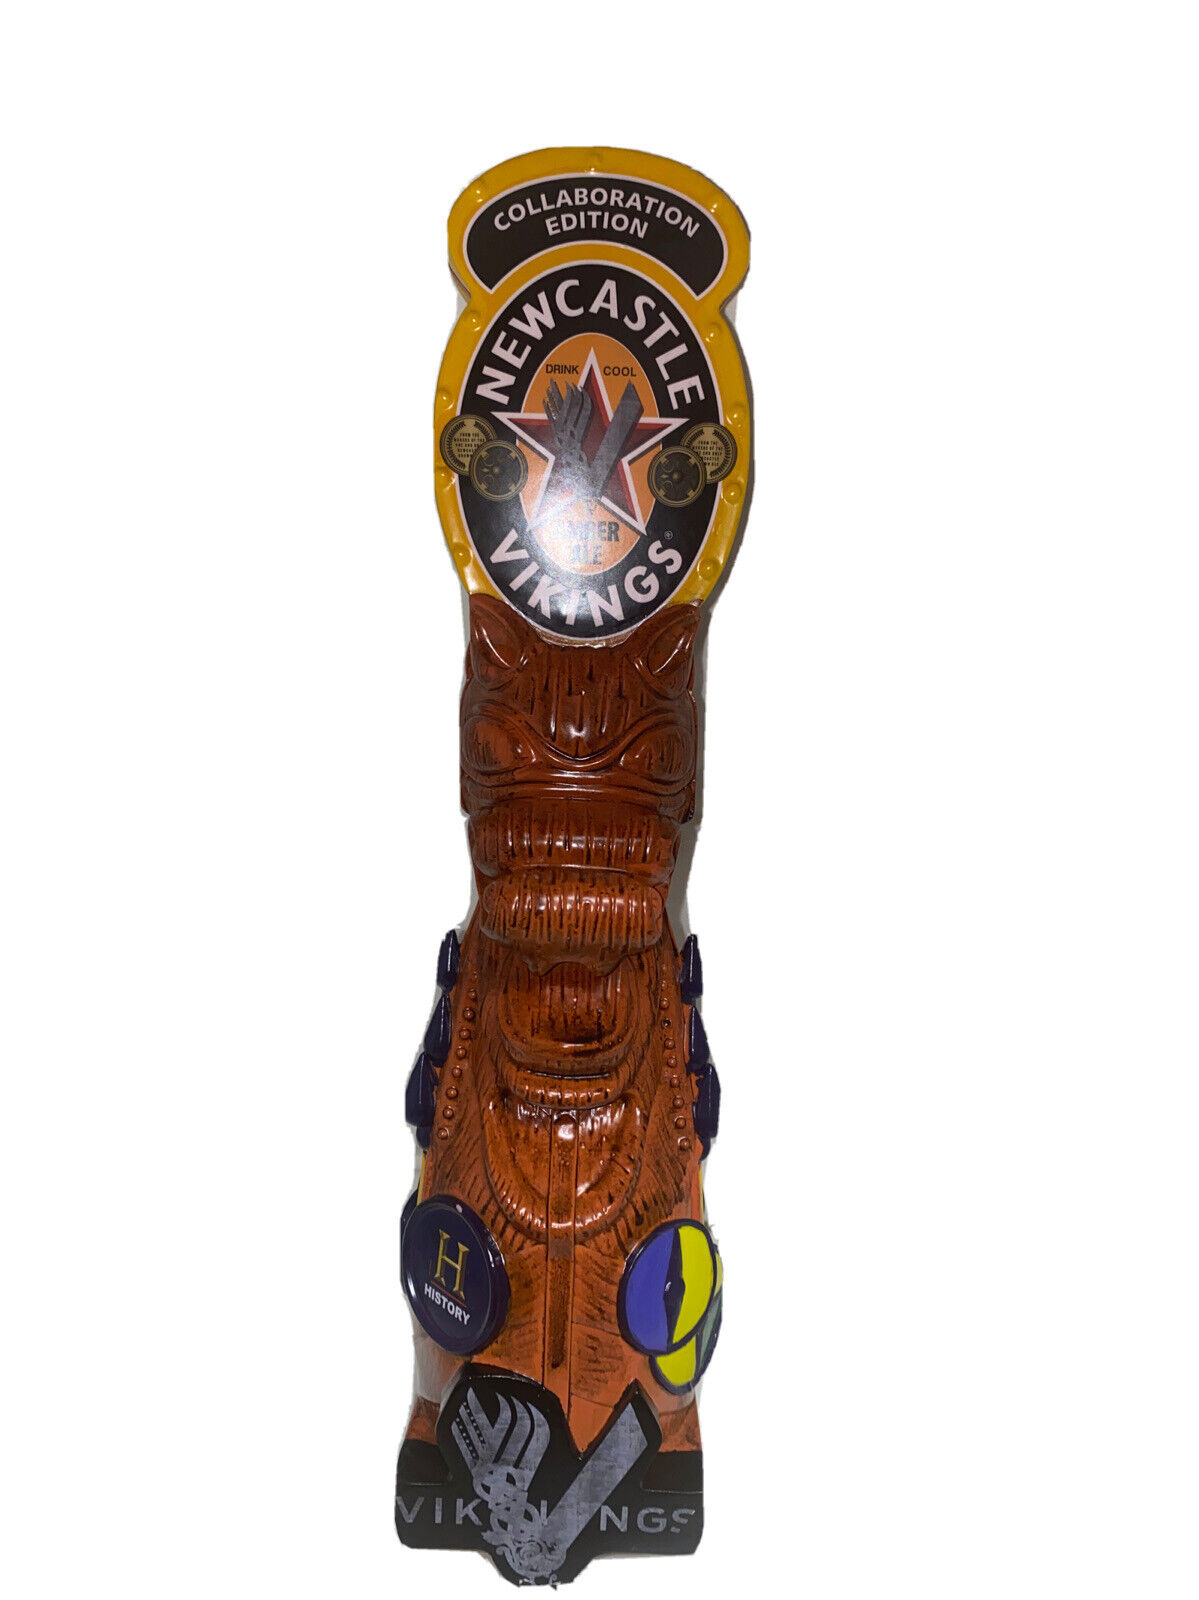 New Figural Newcastle Vikings Amber Ale  Tap Handle Collaboration History Chann